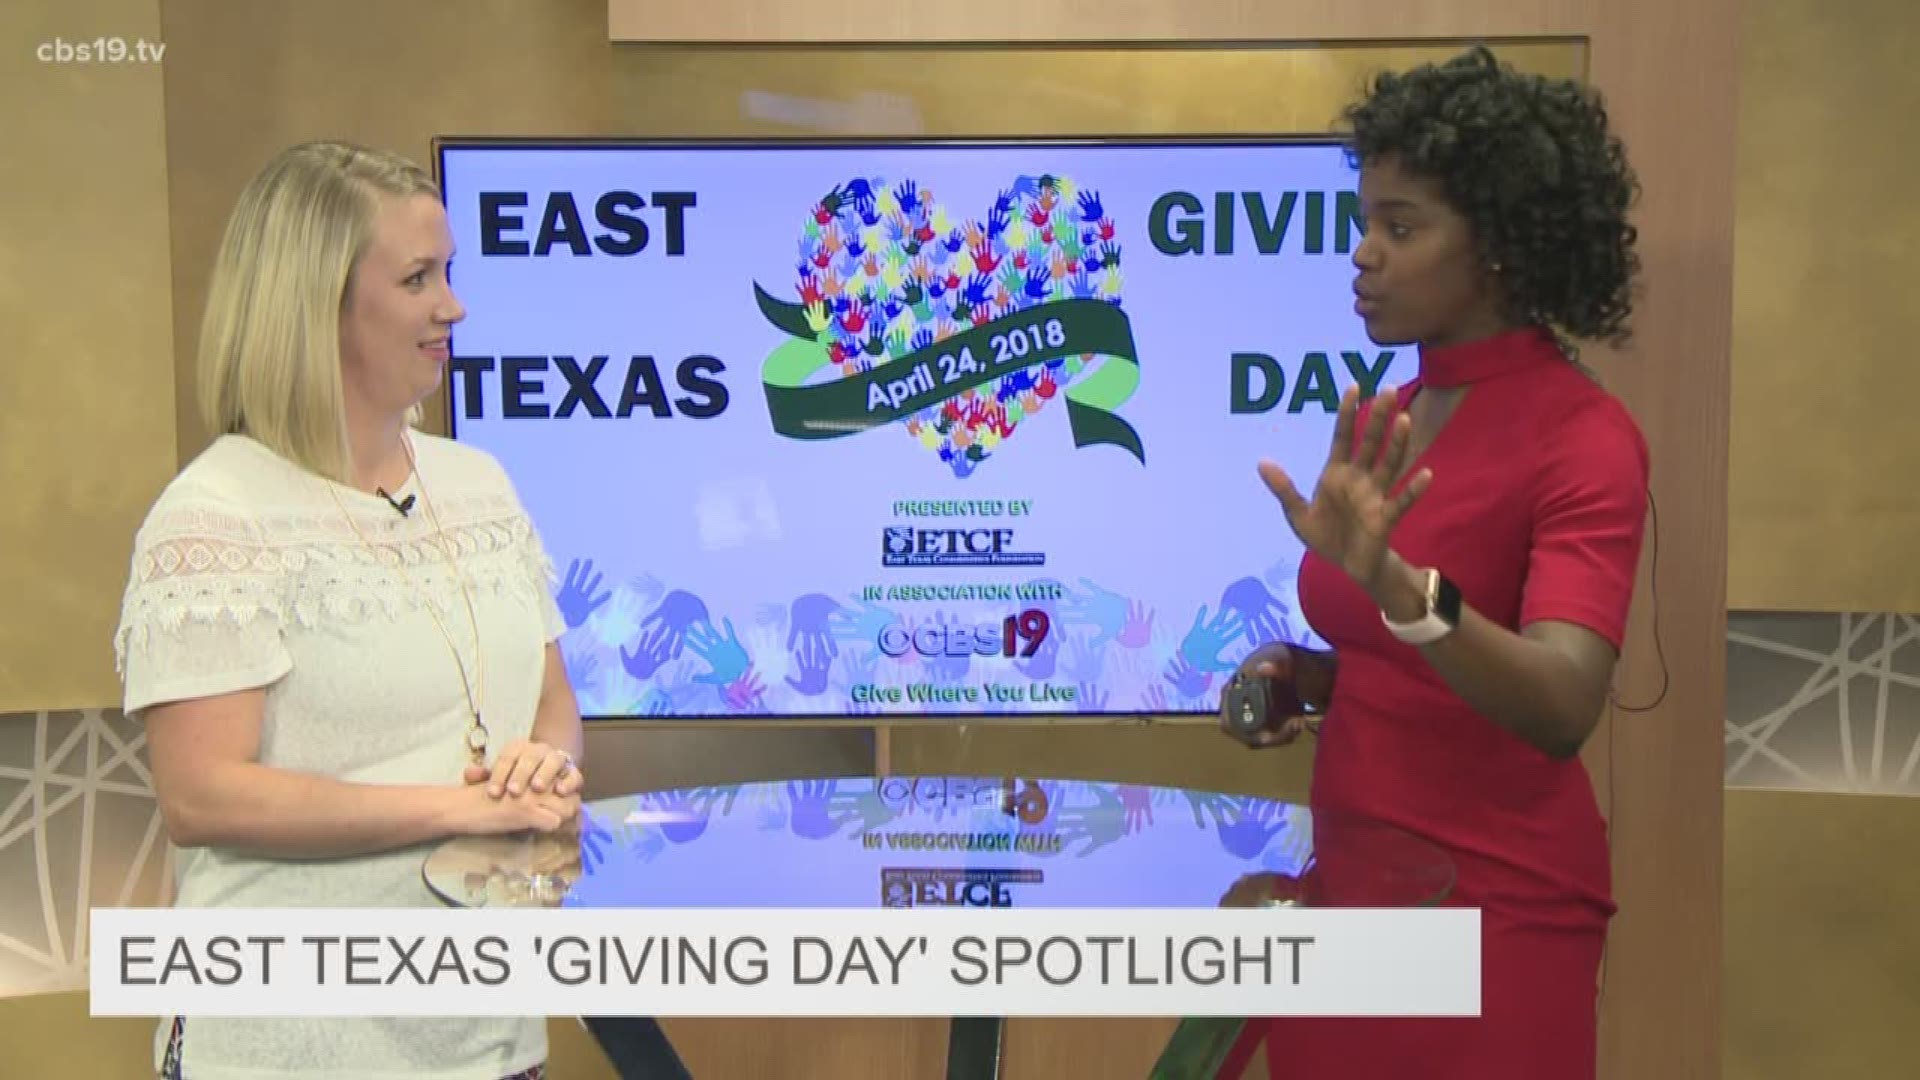 As part of East Texas Giving Day, CBS19 is partnering with the East Texas Communities Foundation to highlight local groups leading up to the 18-hour event on April 24. 